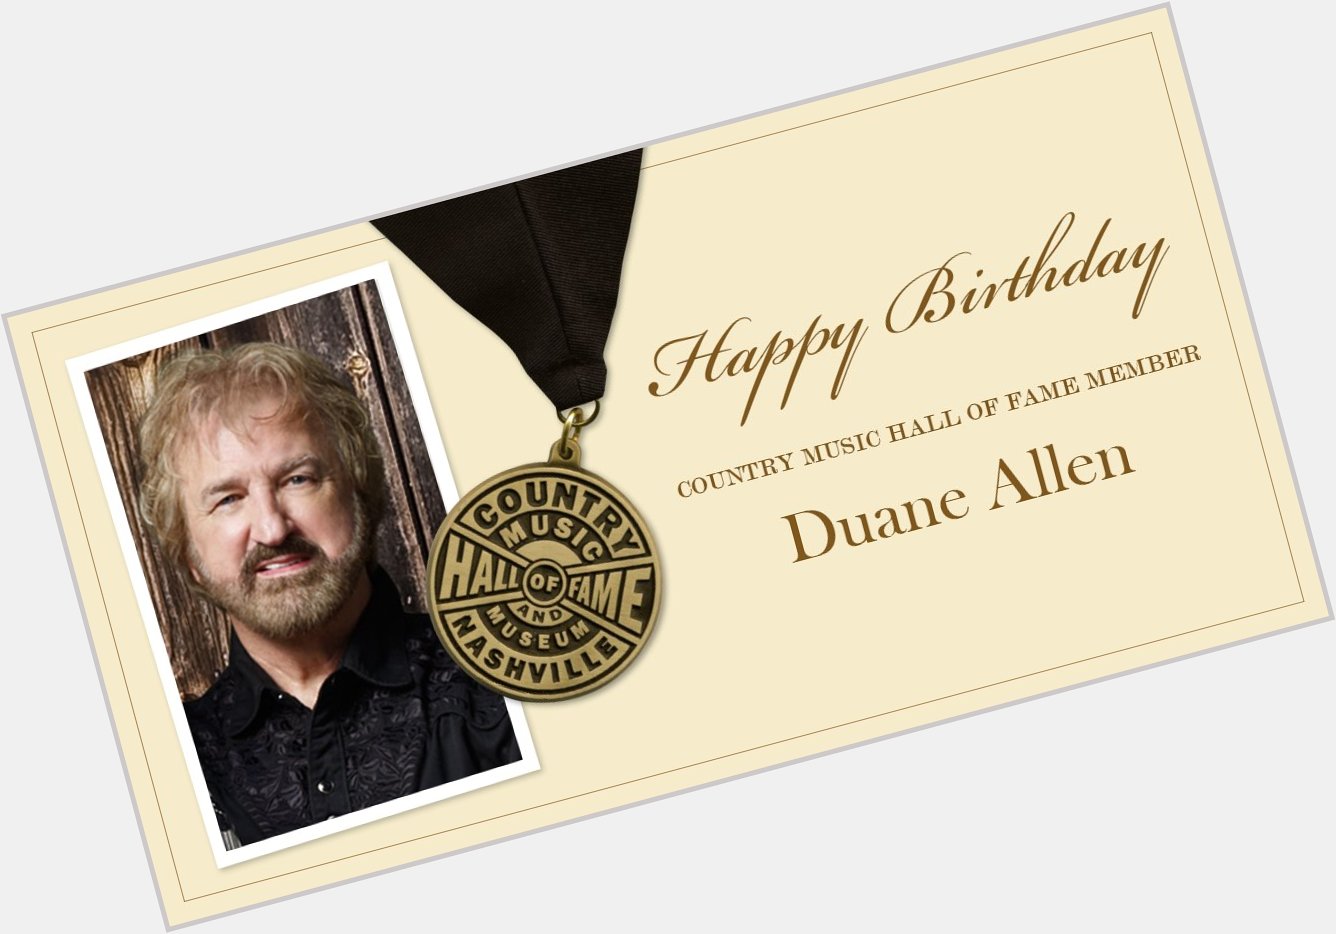 It\s another birthday celebration, we\re wishing a happy birthday to Duane Allen today! 